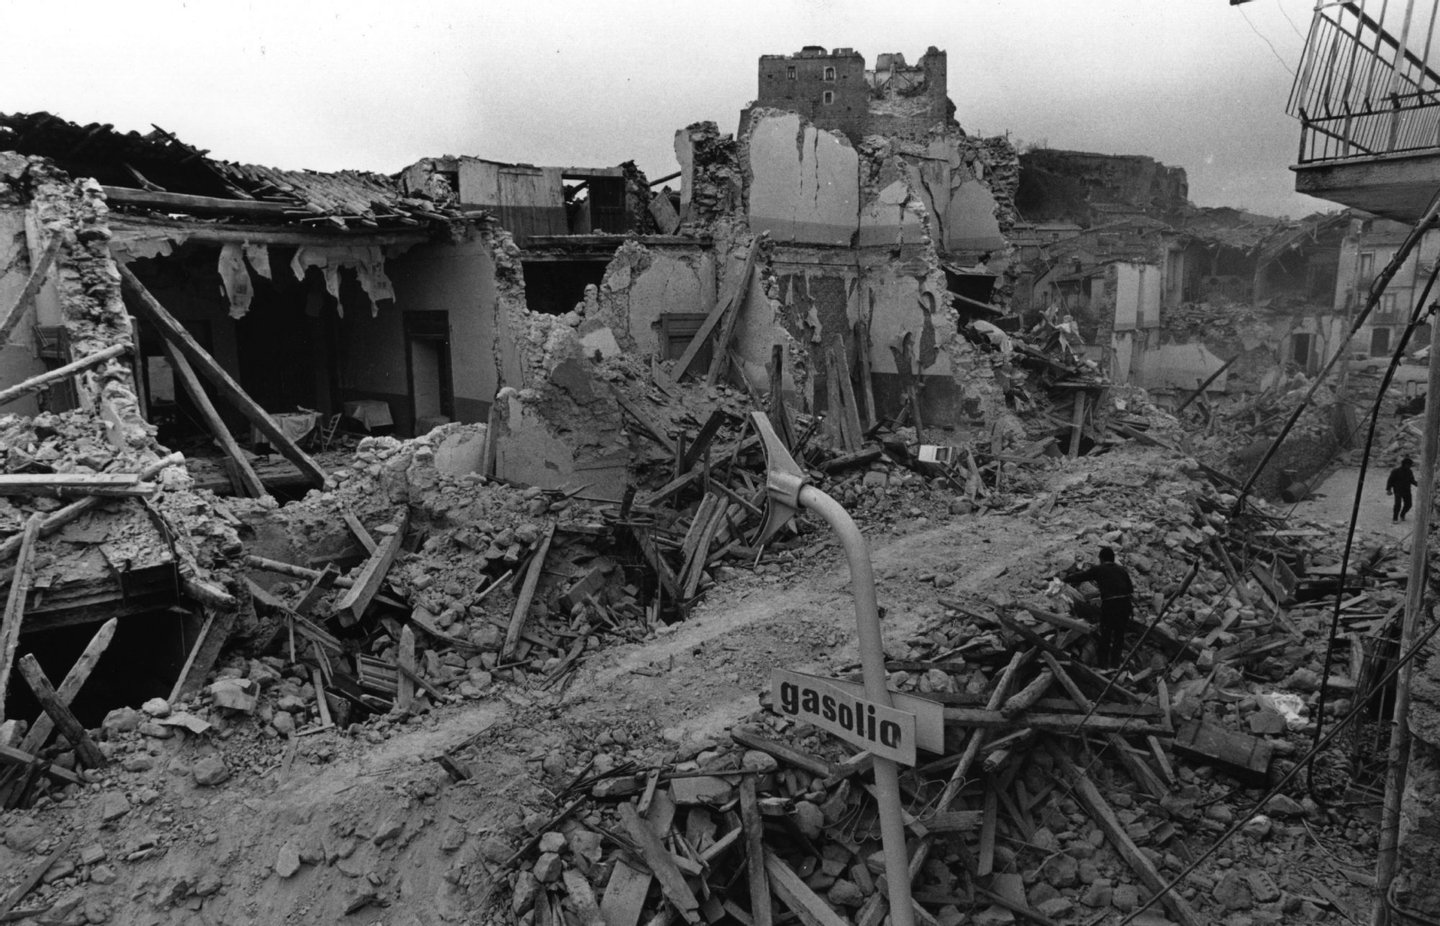 circa 1980: Ruins left after an earthquake hit Southern Italy. (Photo by Evening Standard/Getty Images)